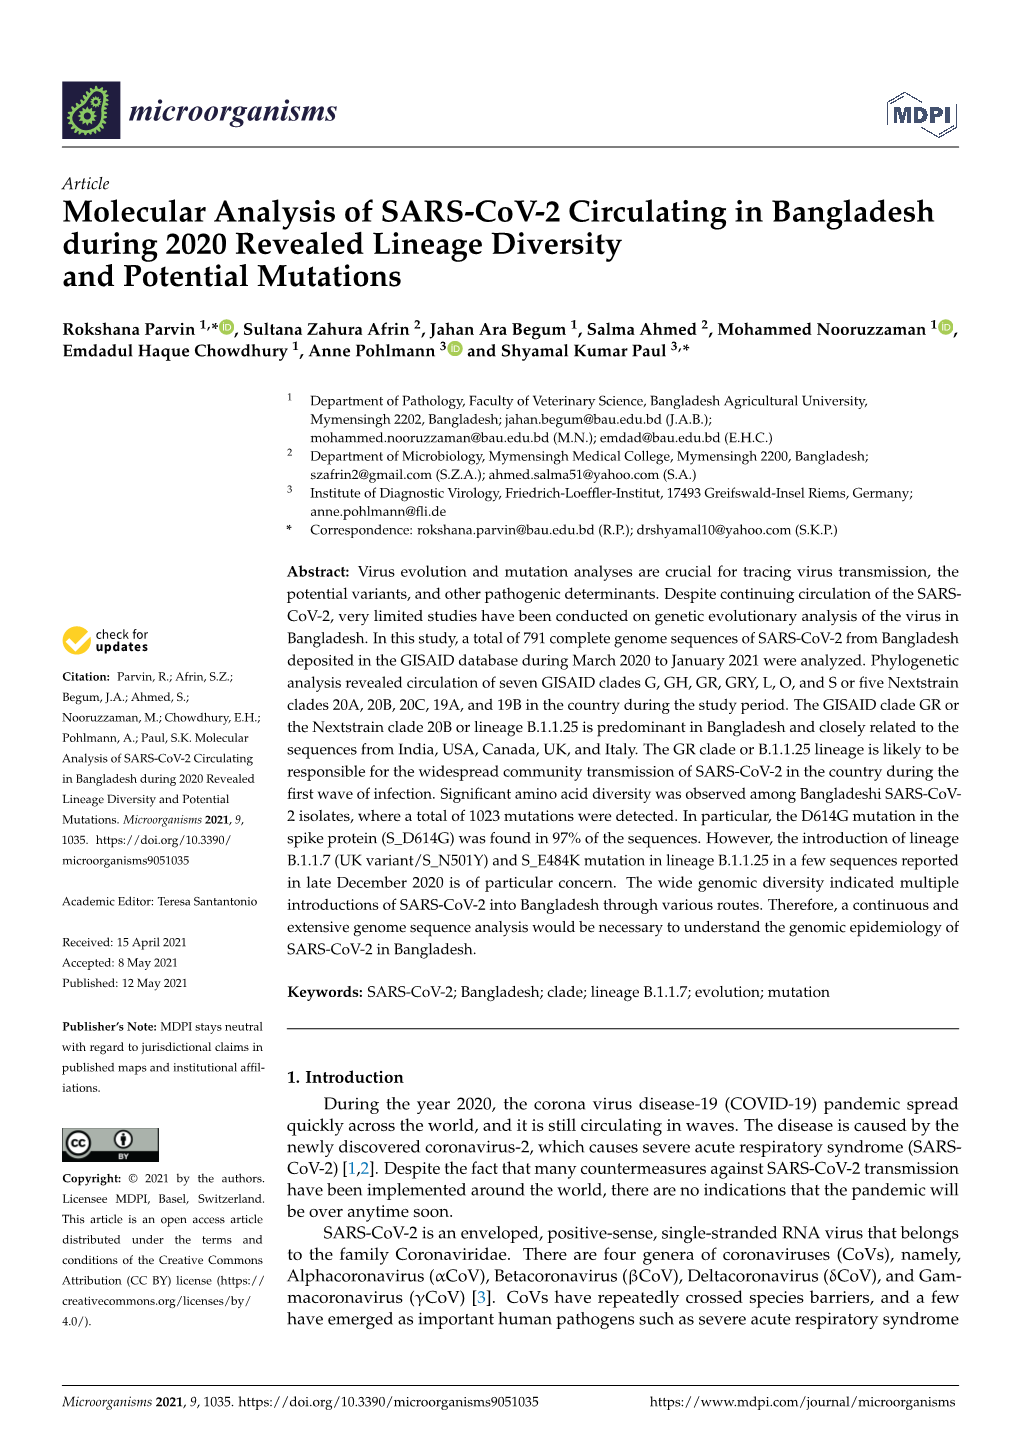 Molecular Analysis of SARS-Cov-2 Circulating in Bangladesh During 2020 Revealed Lineage Diversity and Potential Mutations